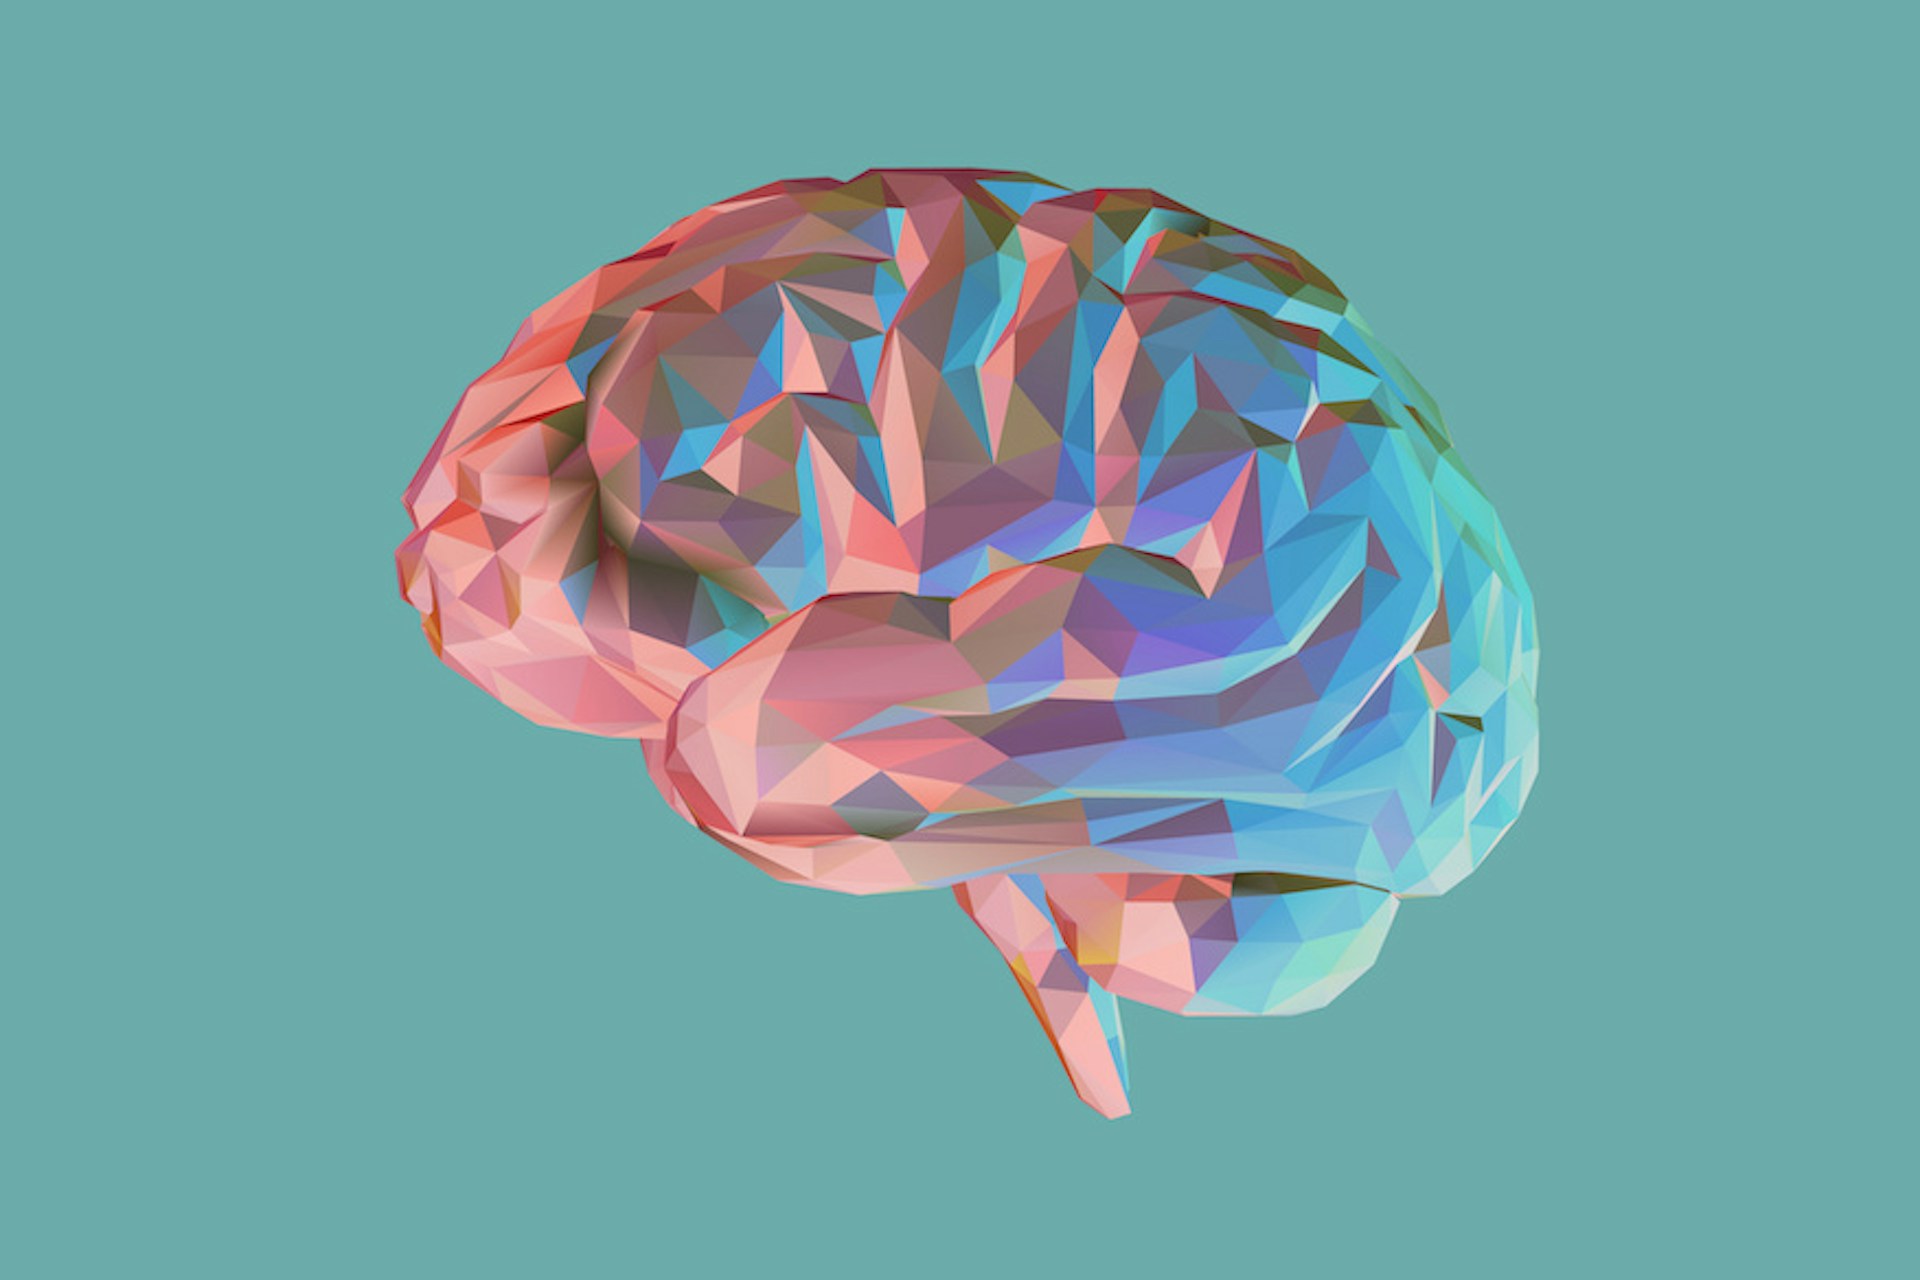 3D illustration of a brain for picturing sentiment analysis